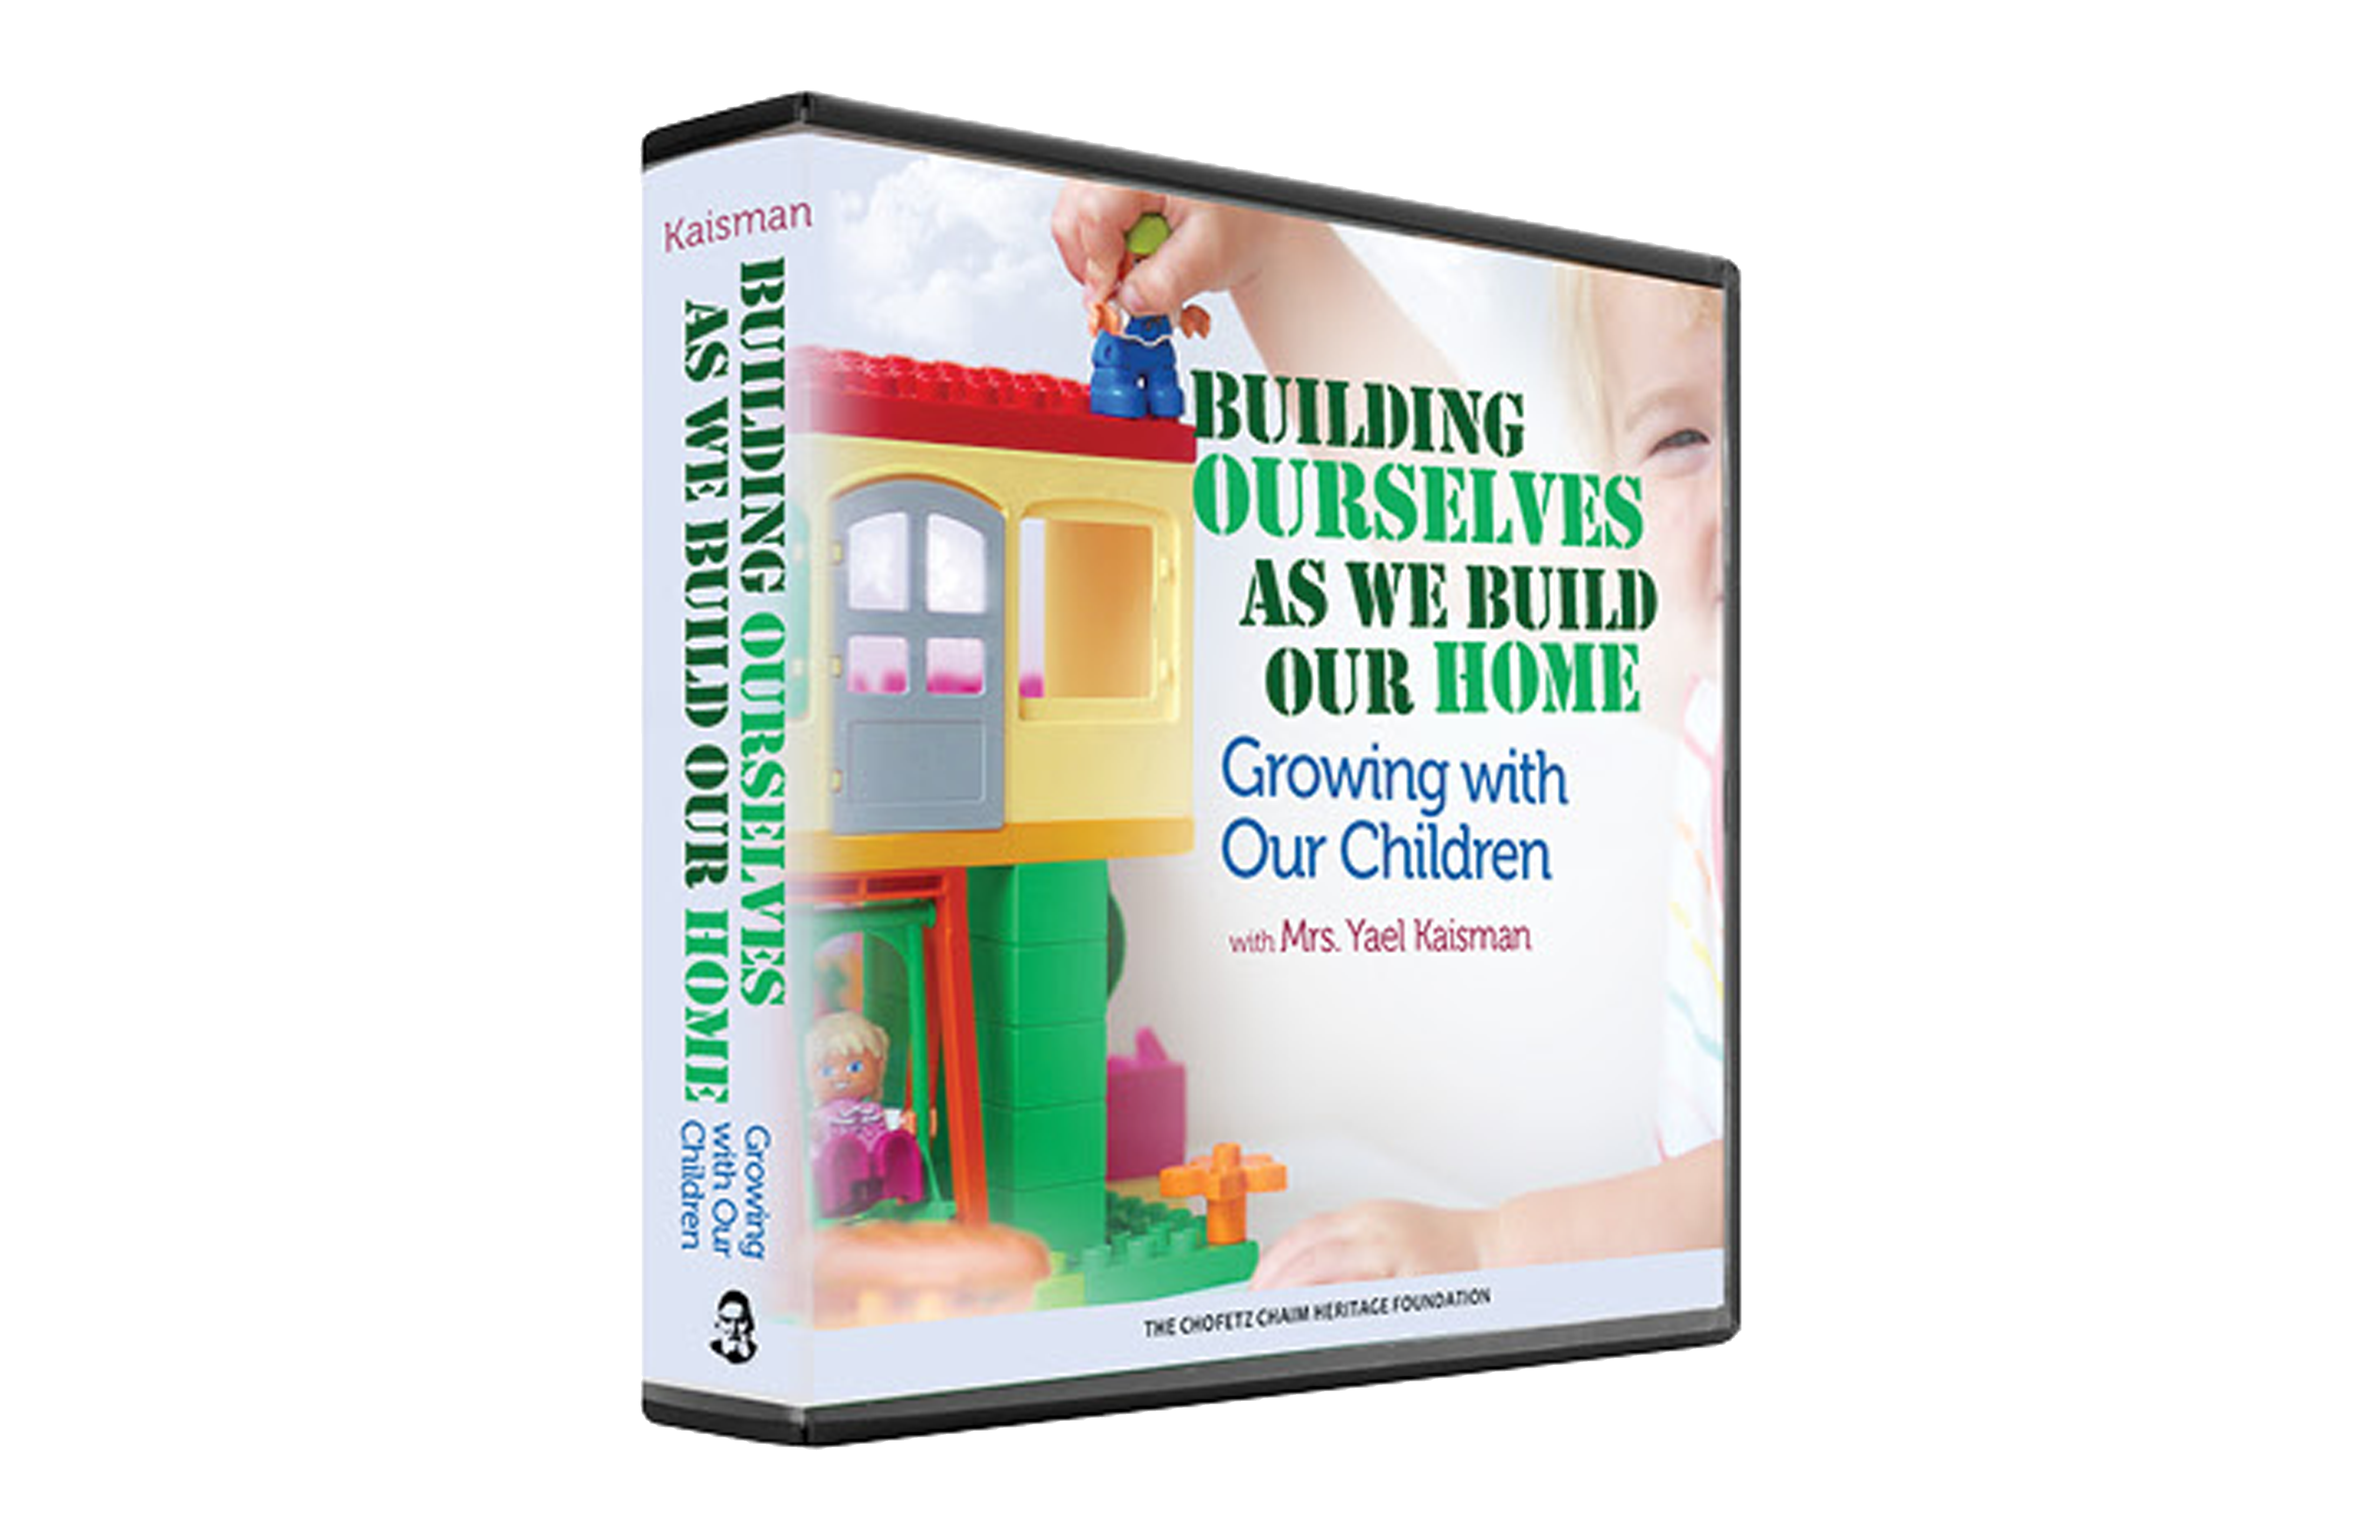 We Build Our Homes by Laura Knowles